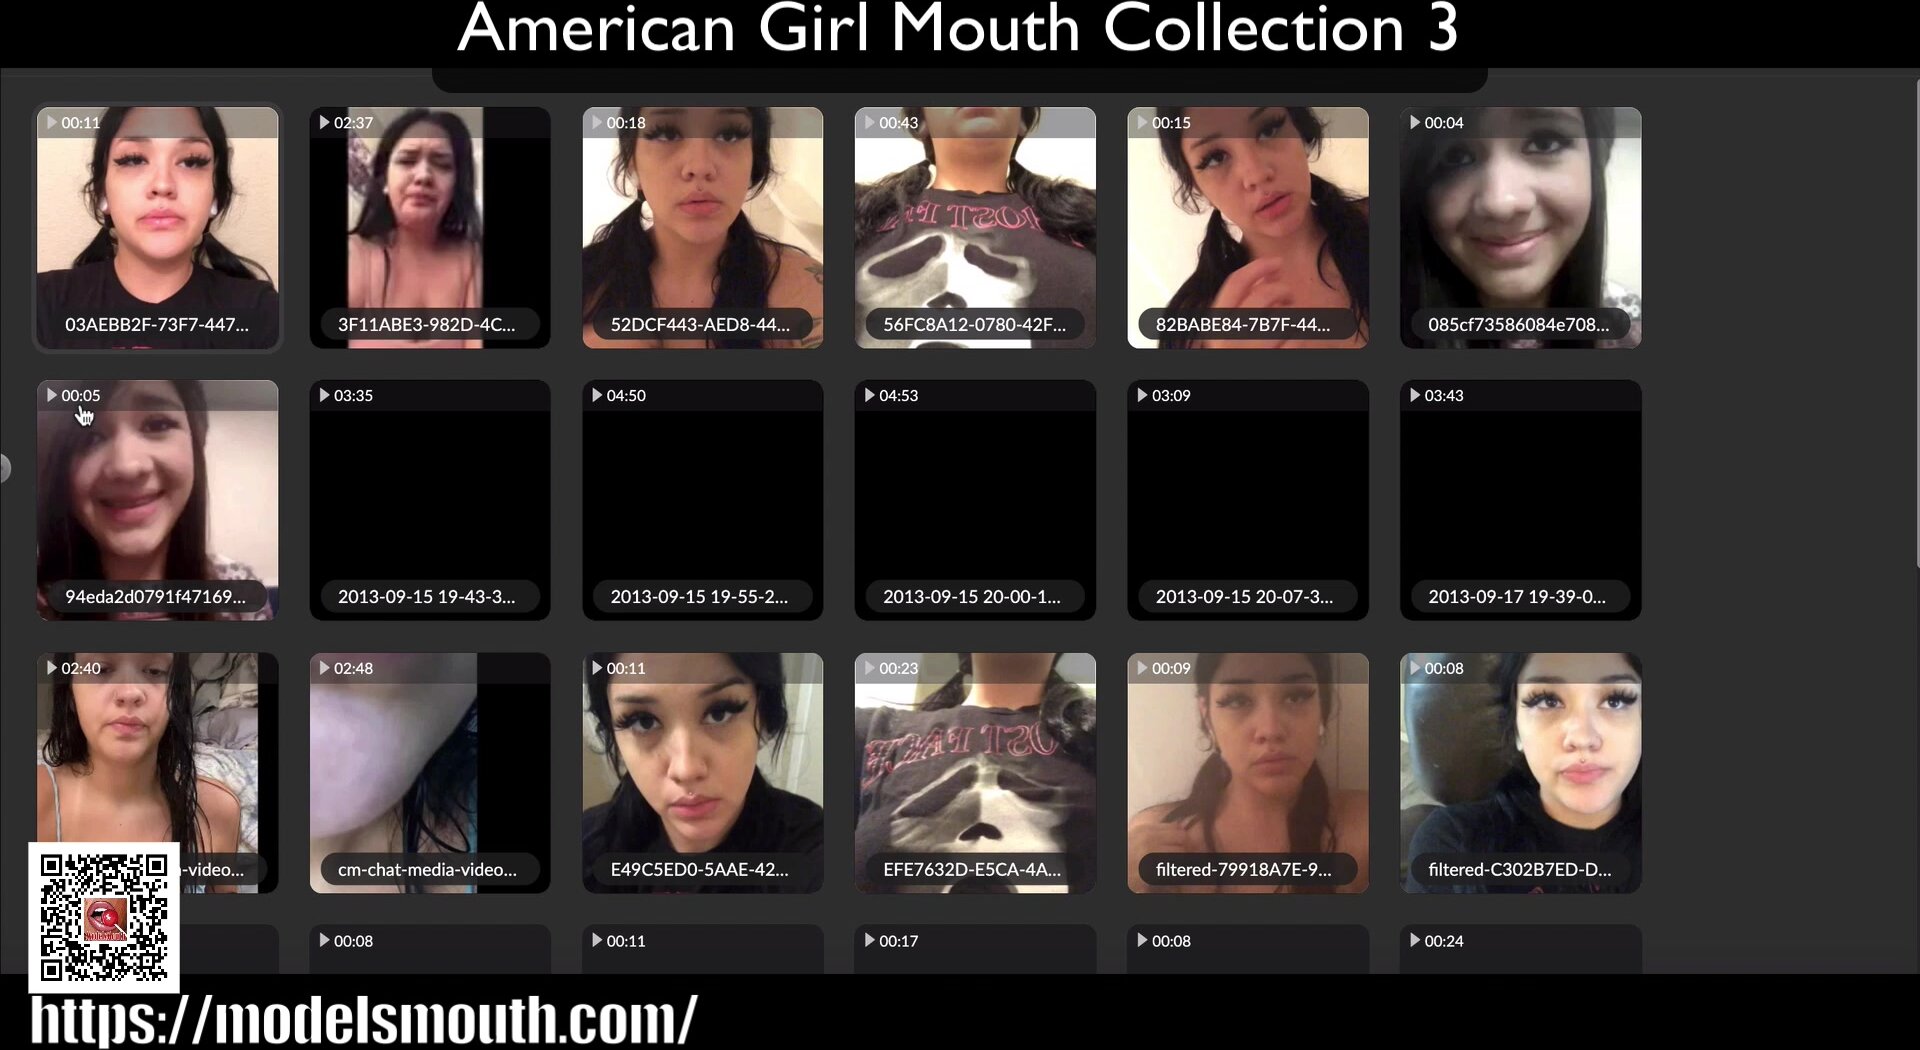 American Girl Mouth Collection 3